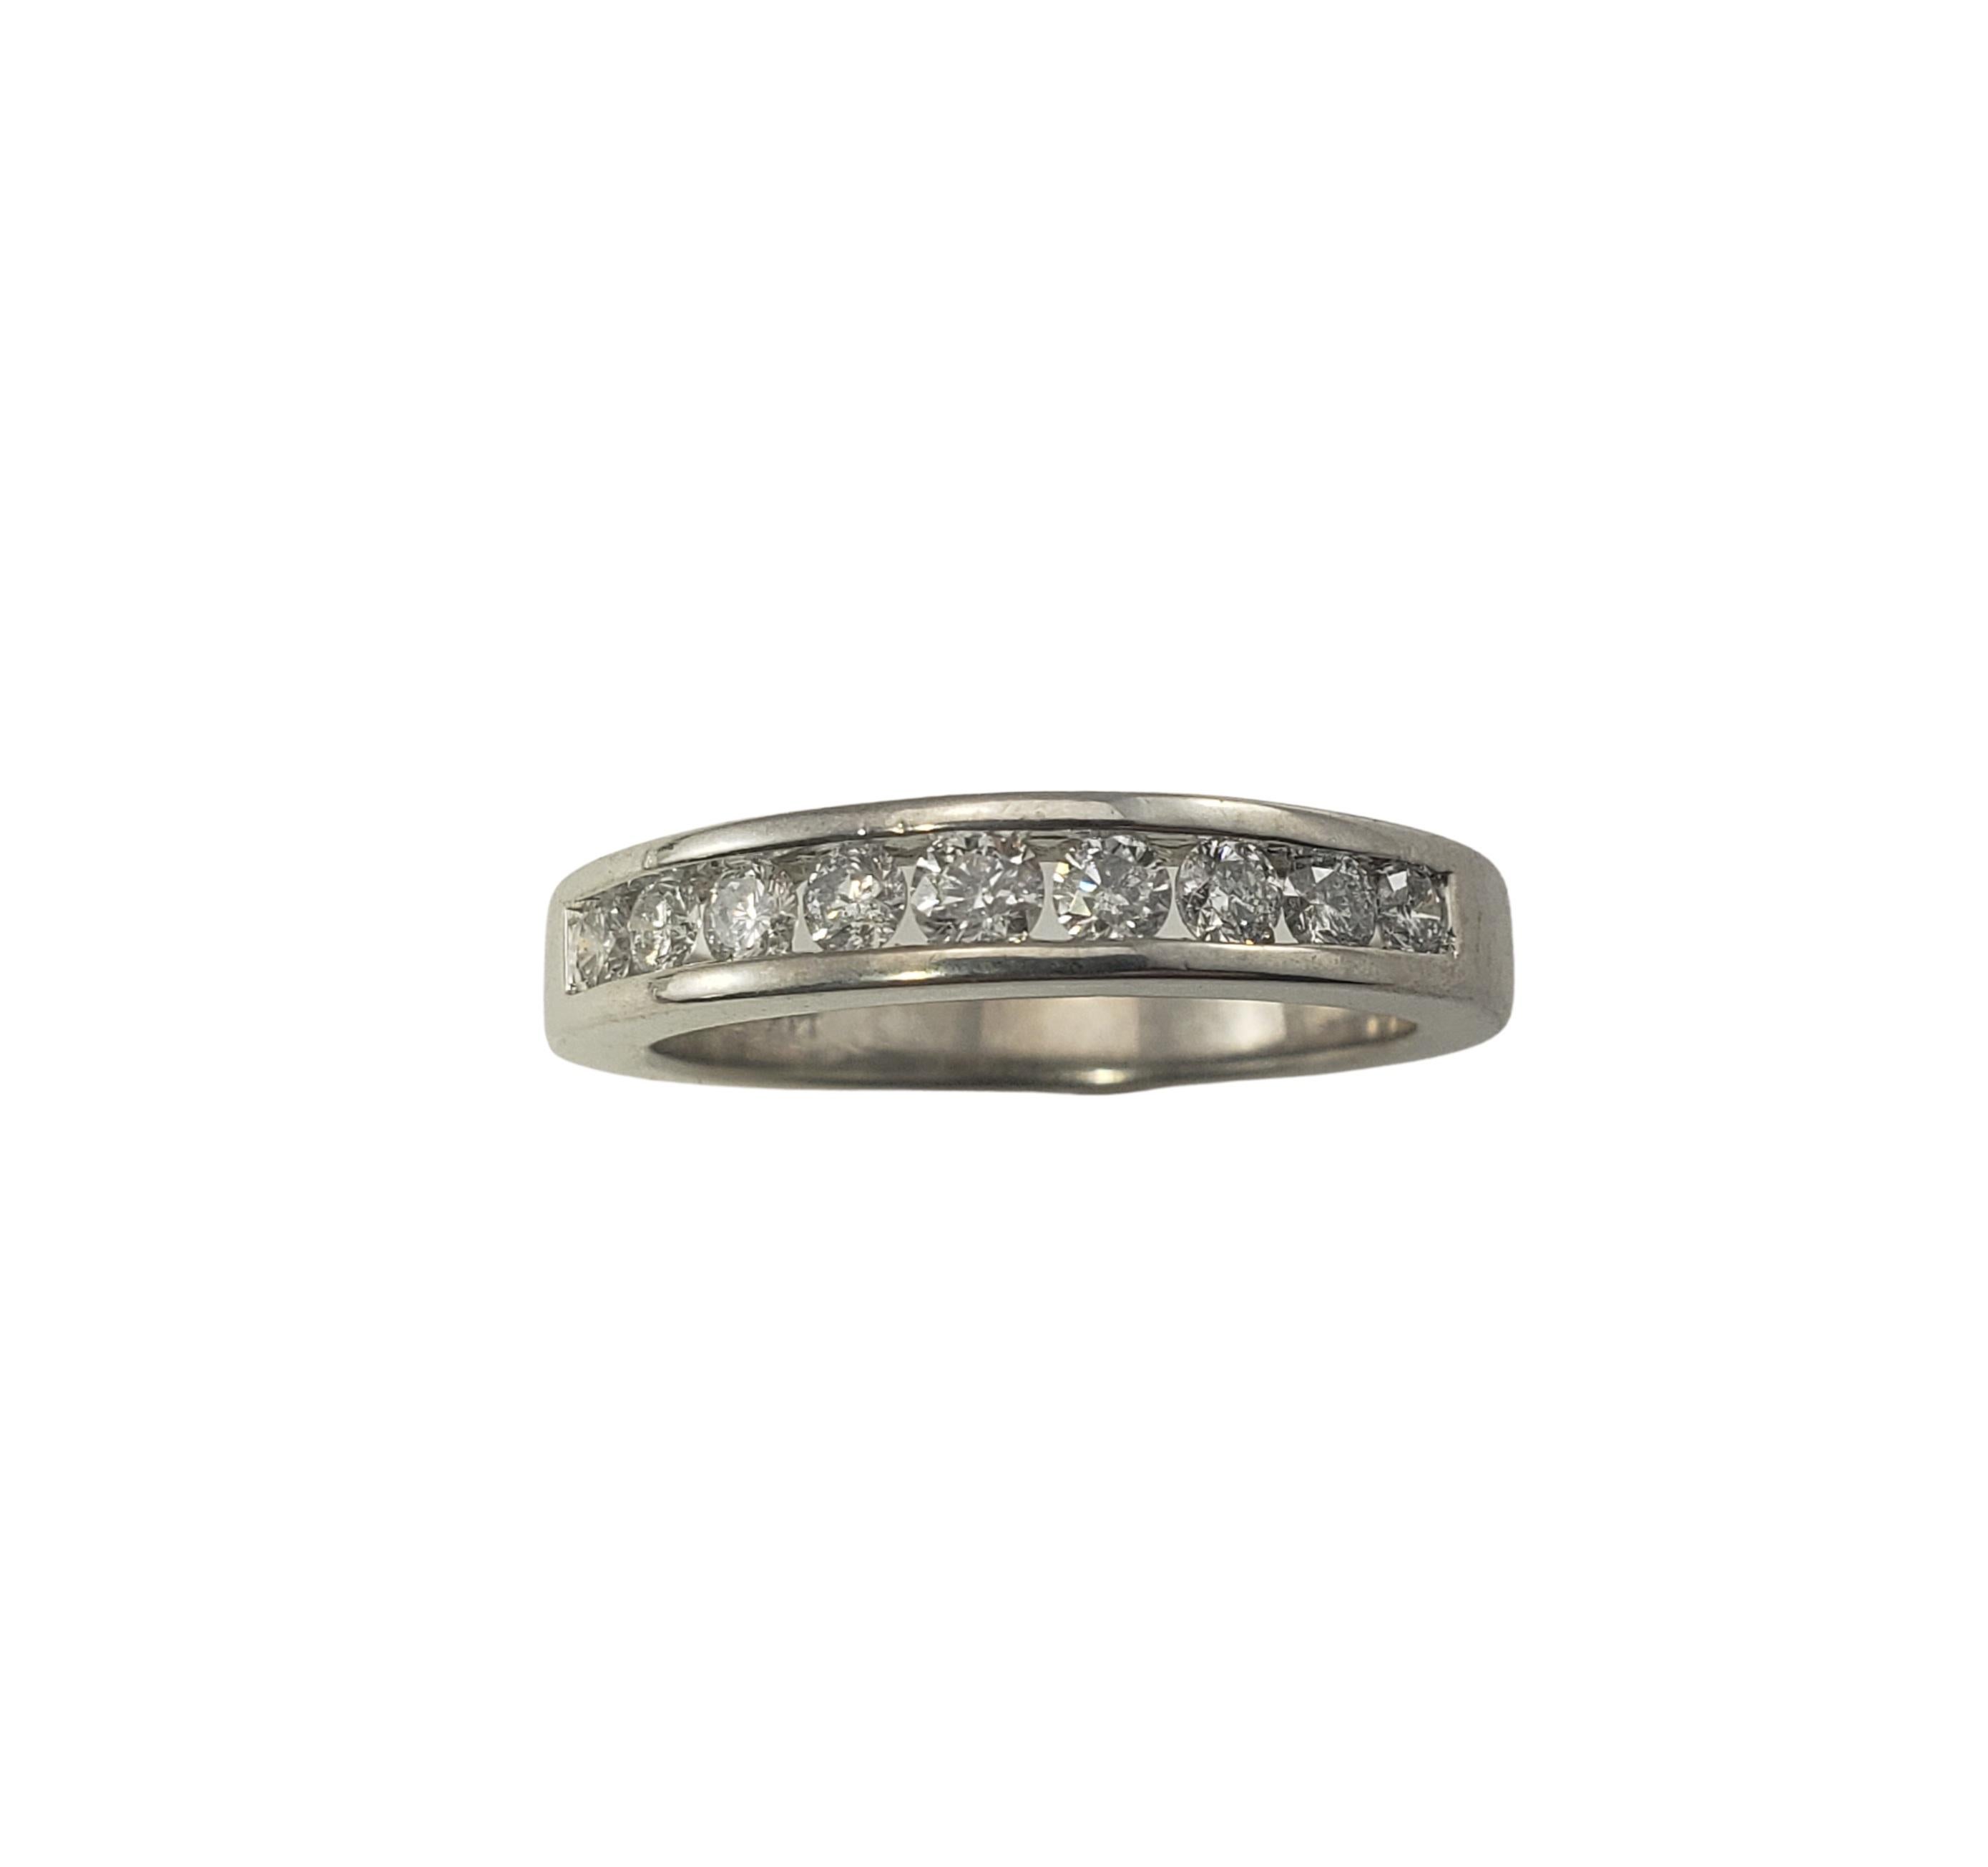 14 Karat White Gold Diamond Wedding Band Ring Size 7.25-

This sparkling ring features nine round brilliant cut diamonds set in classic 14K white gold.  Width:  4 mm.  Shank:  3 mm.

Approximate total diamond weight:  .31 ct.

Diamond color: